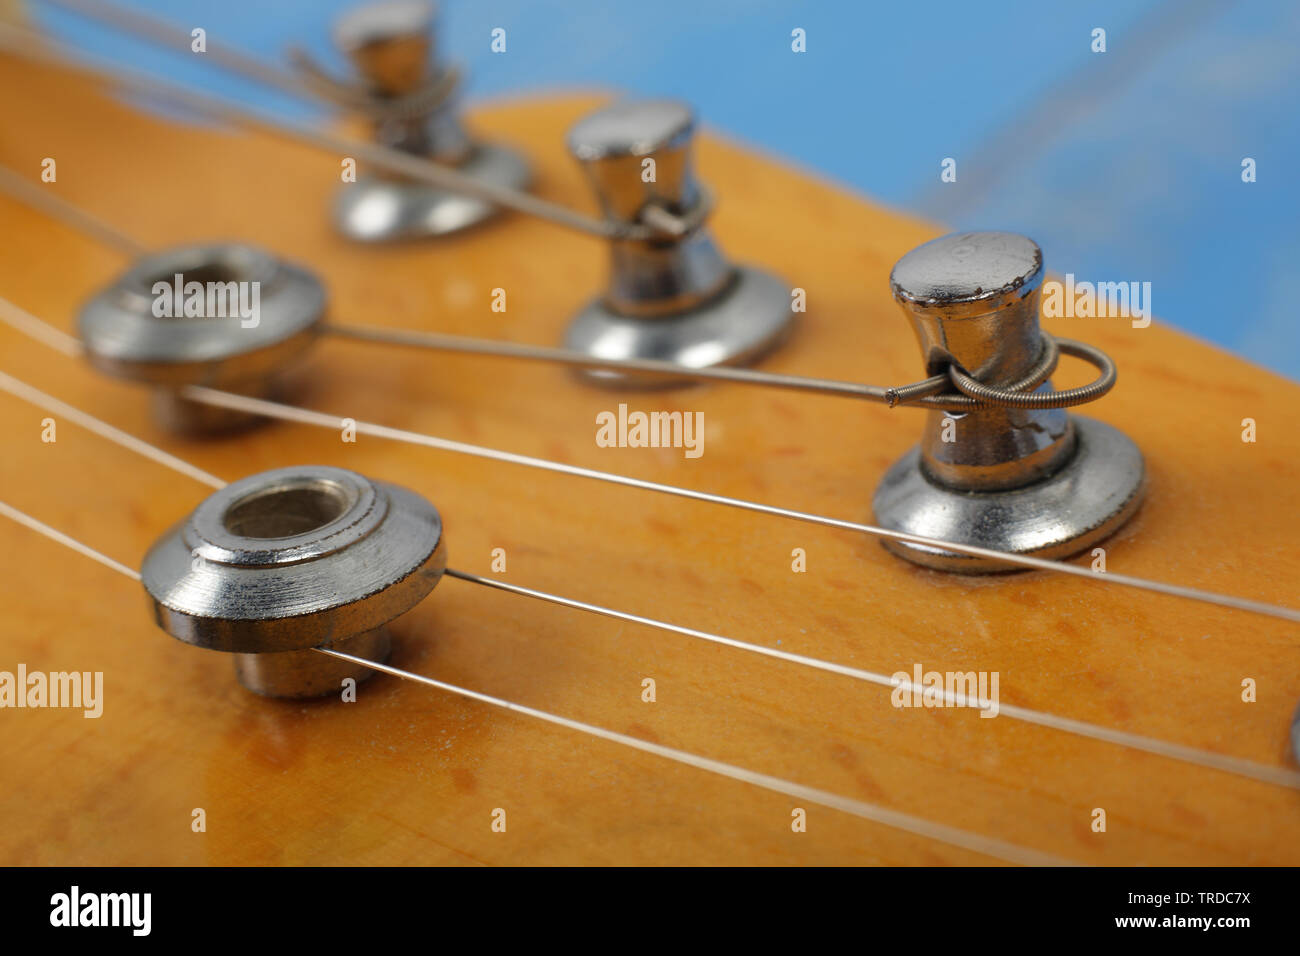 Musical instrument - Fragment headstock peghead neck tuning peg electric guitar on a blue wood background. Stock Photo